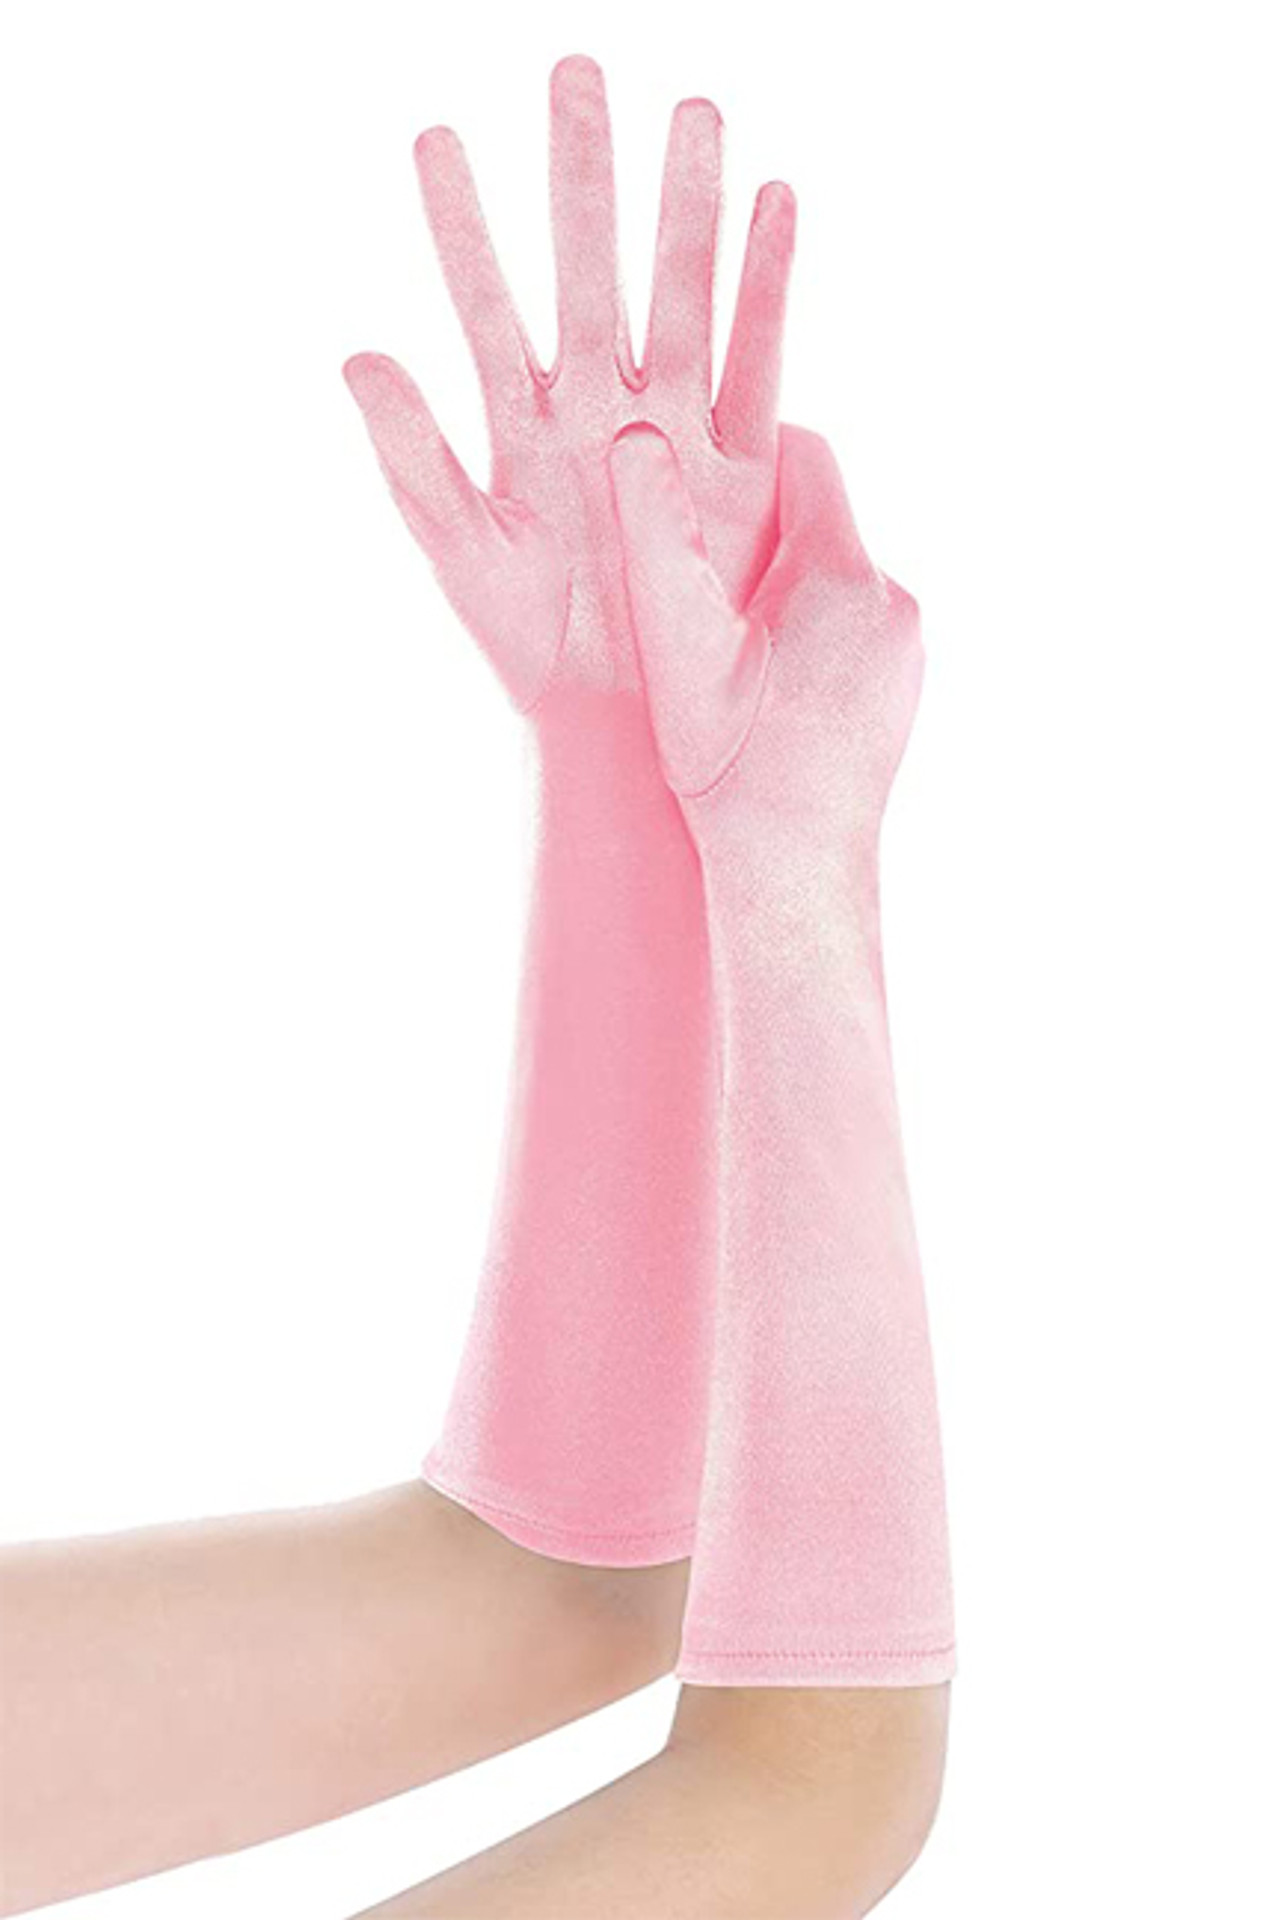 Lavender Satin Opera Gloves 14 - Buy Costume Accessories at Lucky Doll  manila